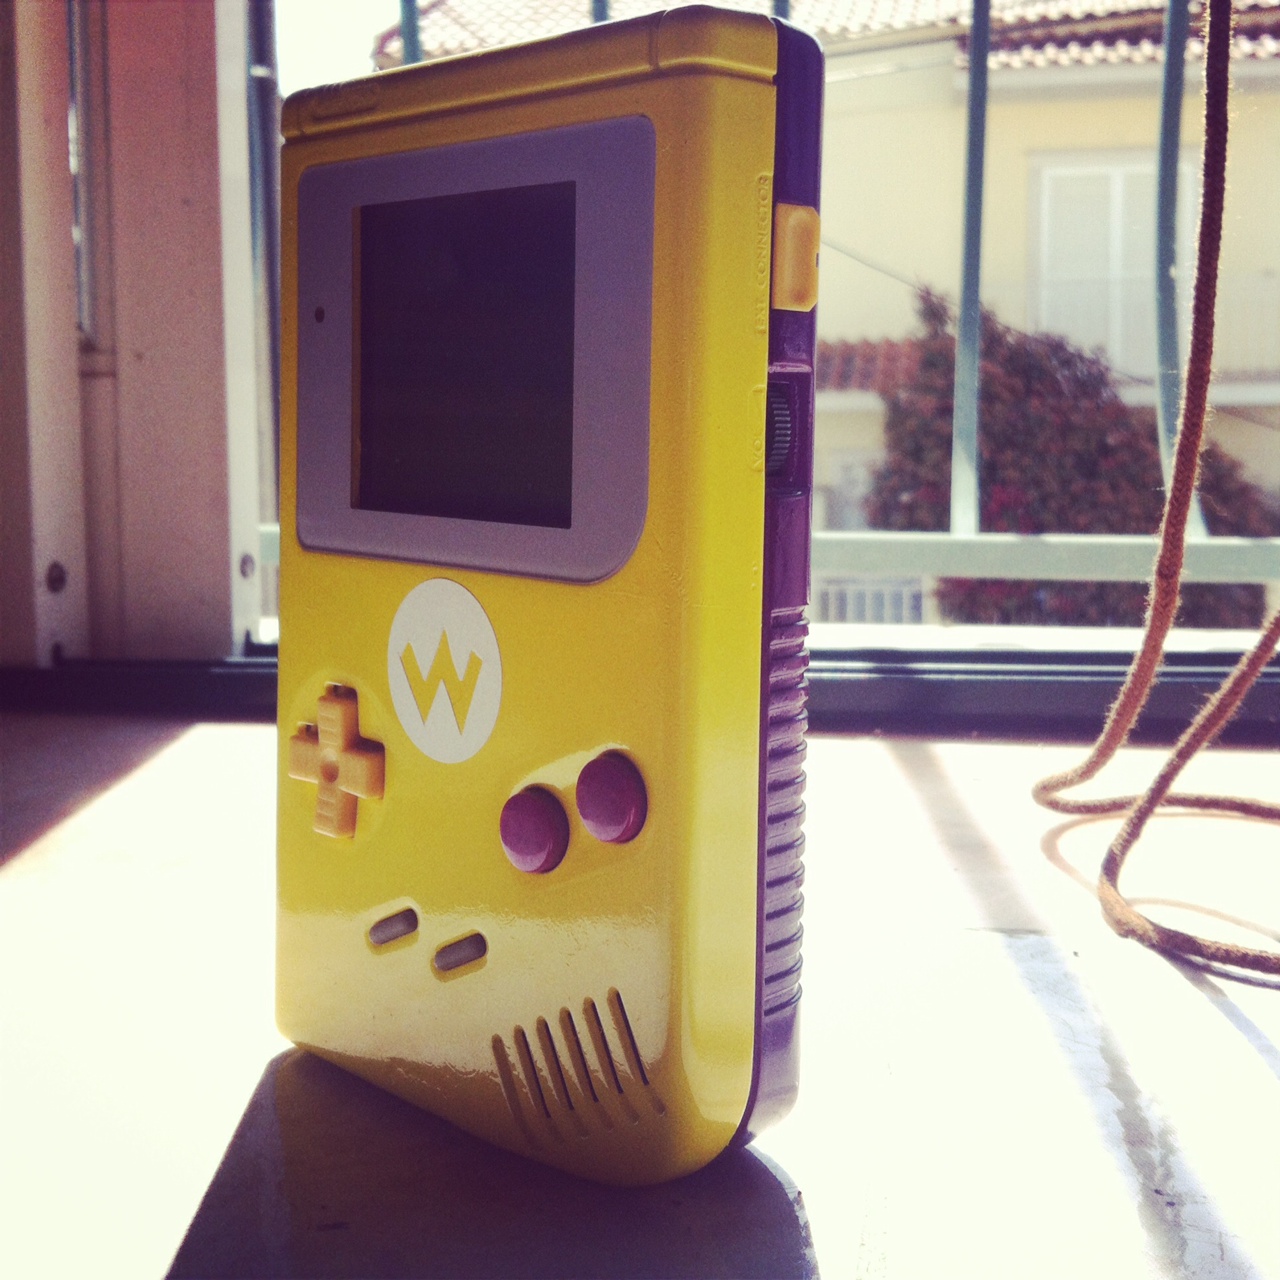 Turning The Game Boy Into Art